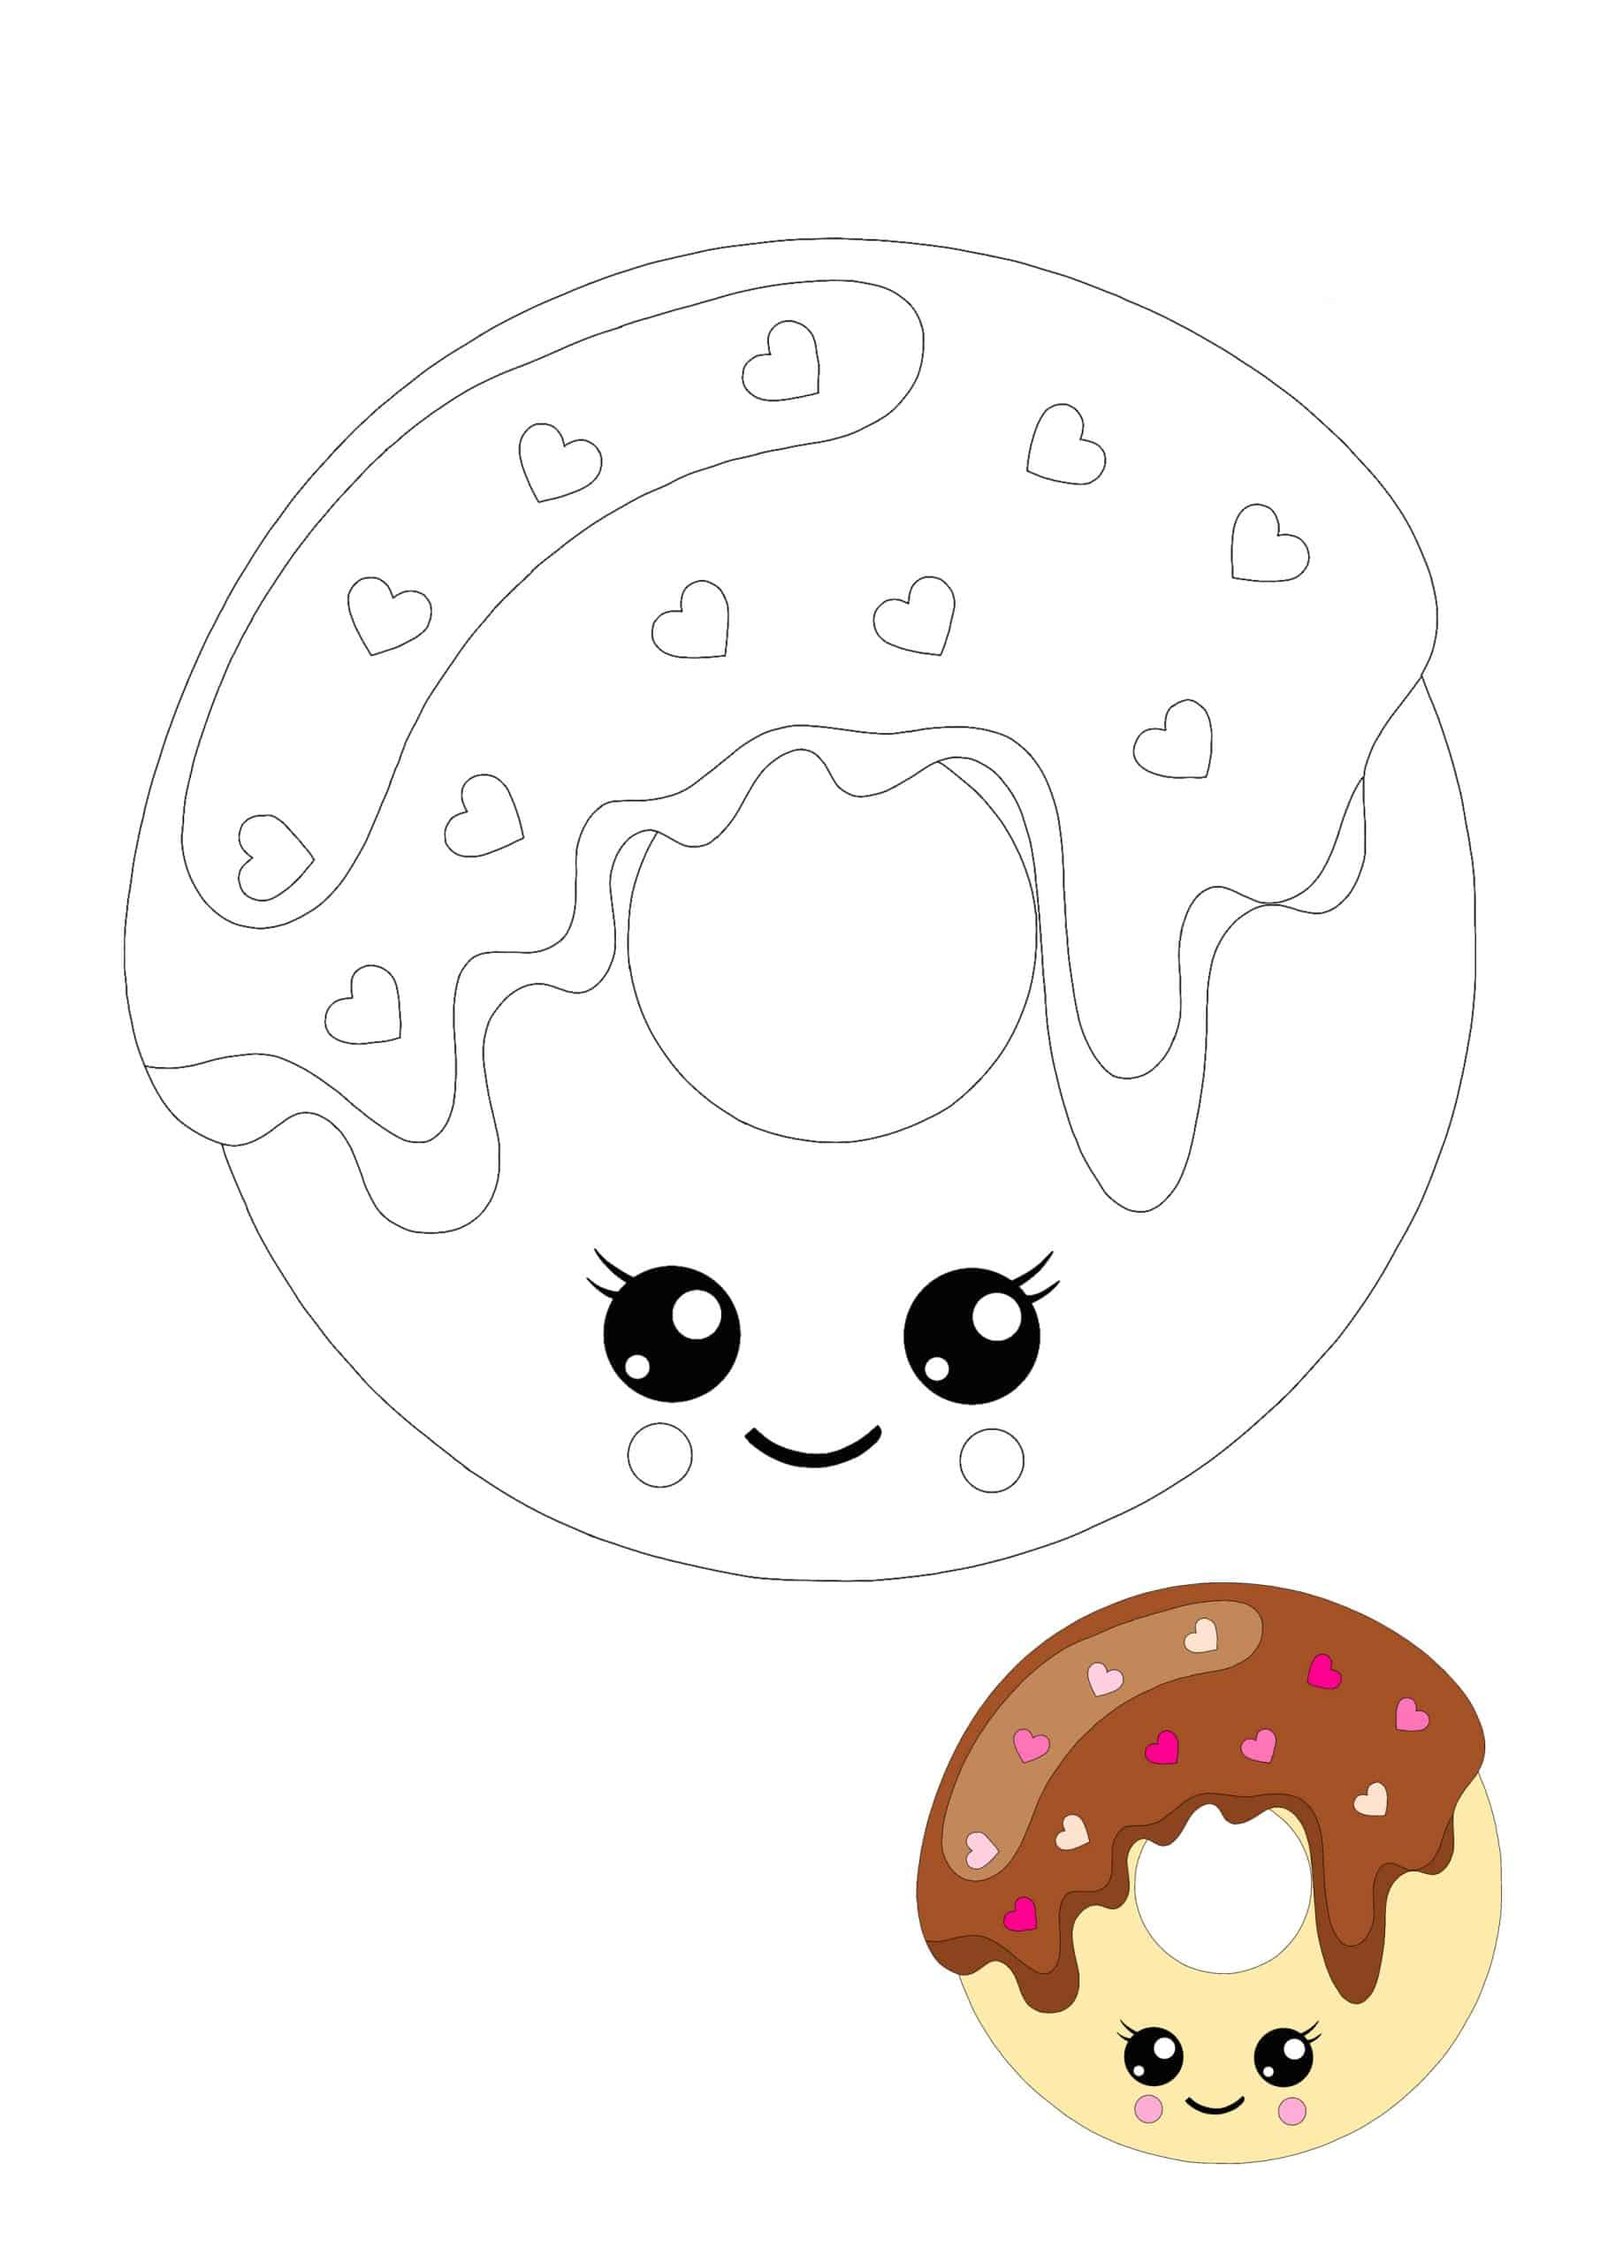 Kawaii Donut coloring page for kids